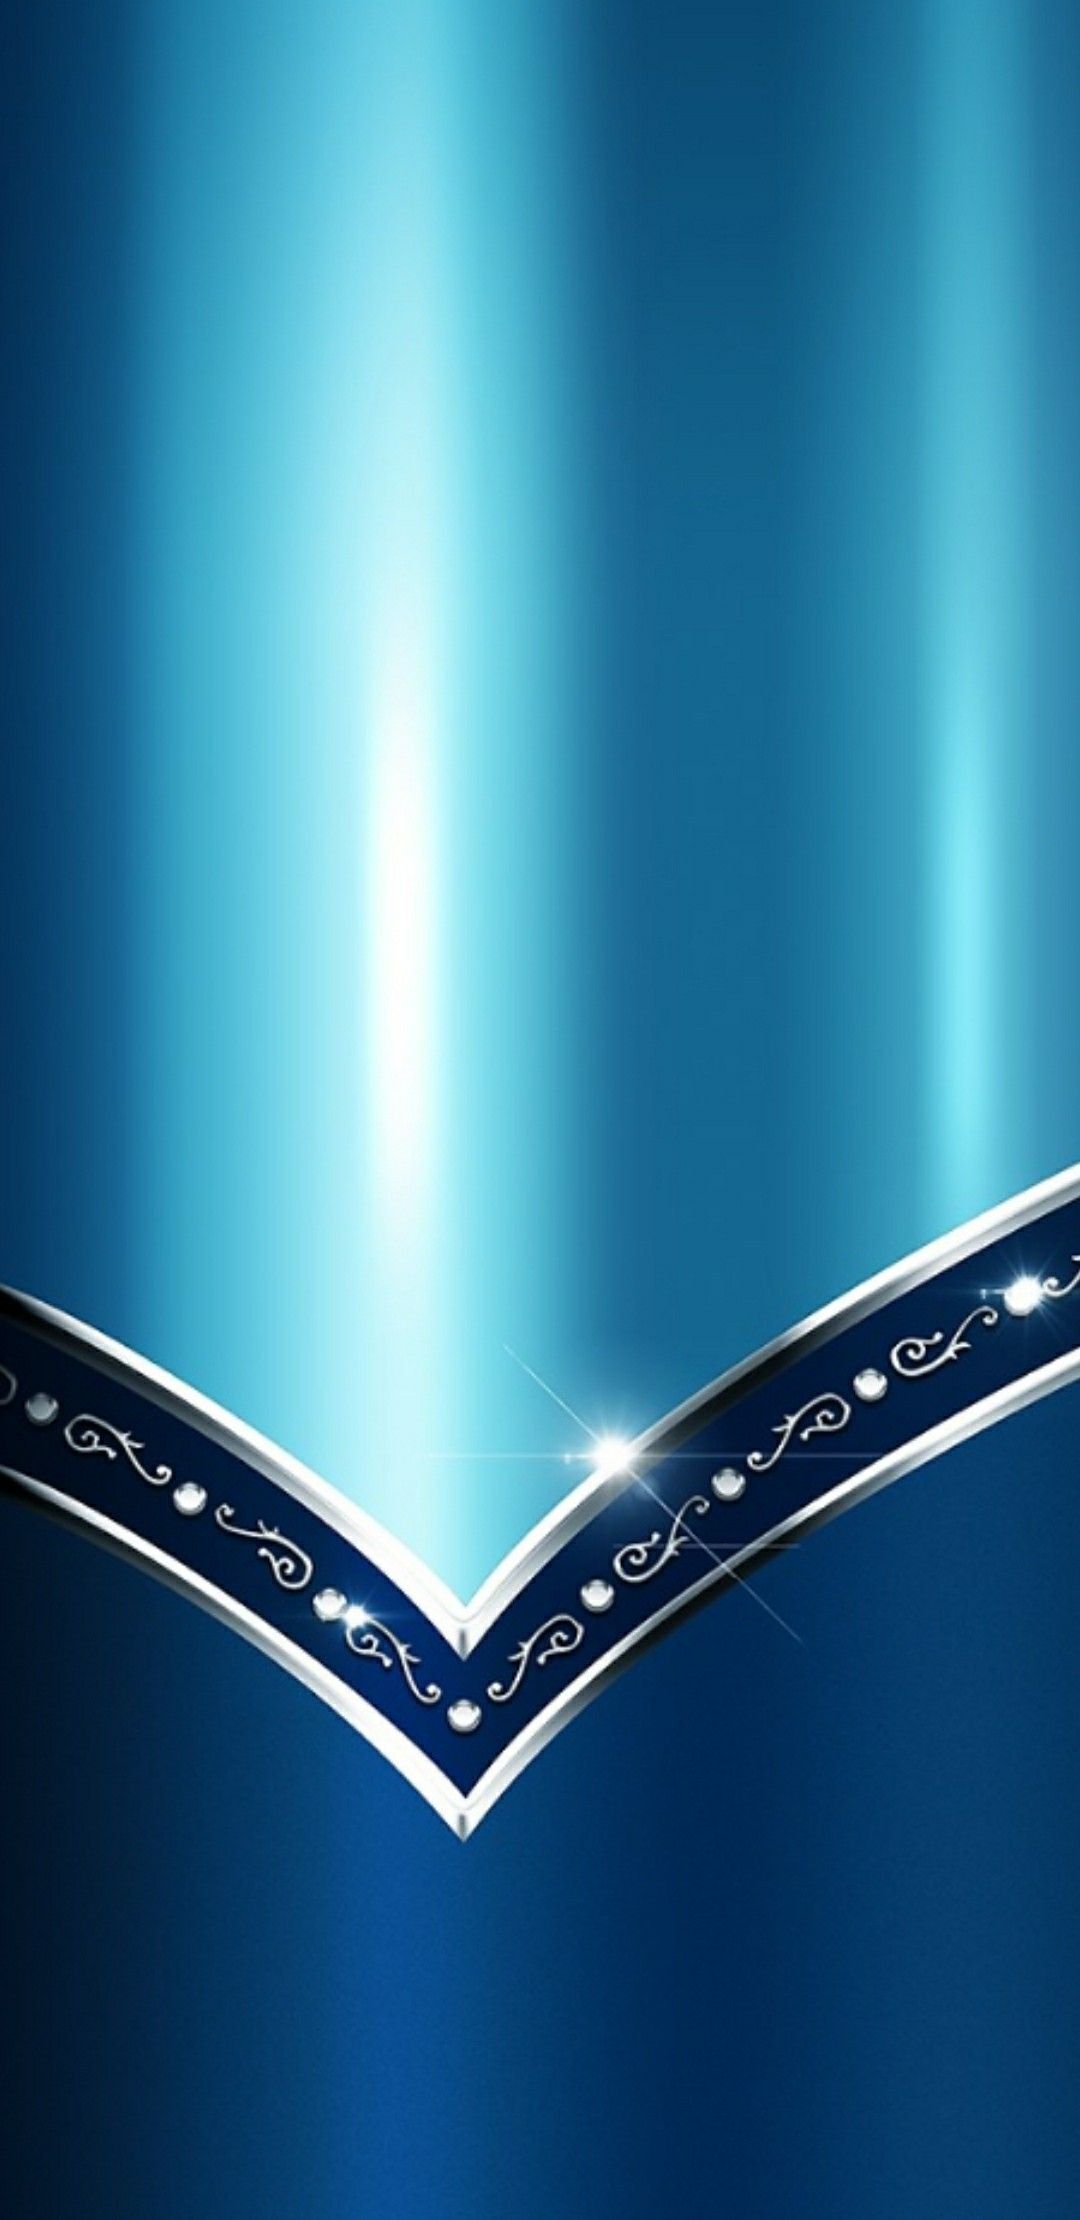 Blue and Silver Wallpaper. Bling wallpaper, Wallpaper edge, Cool and funny wallpaper